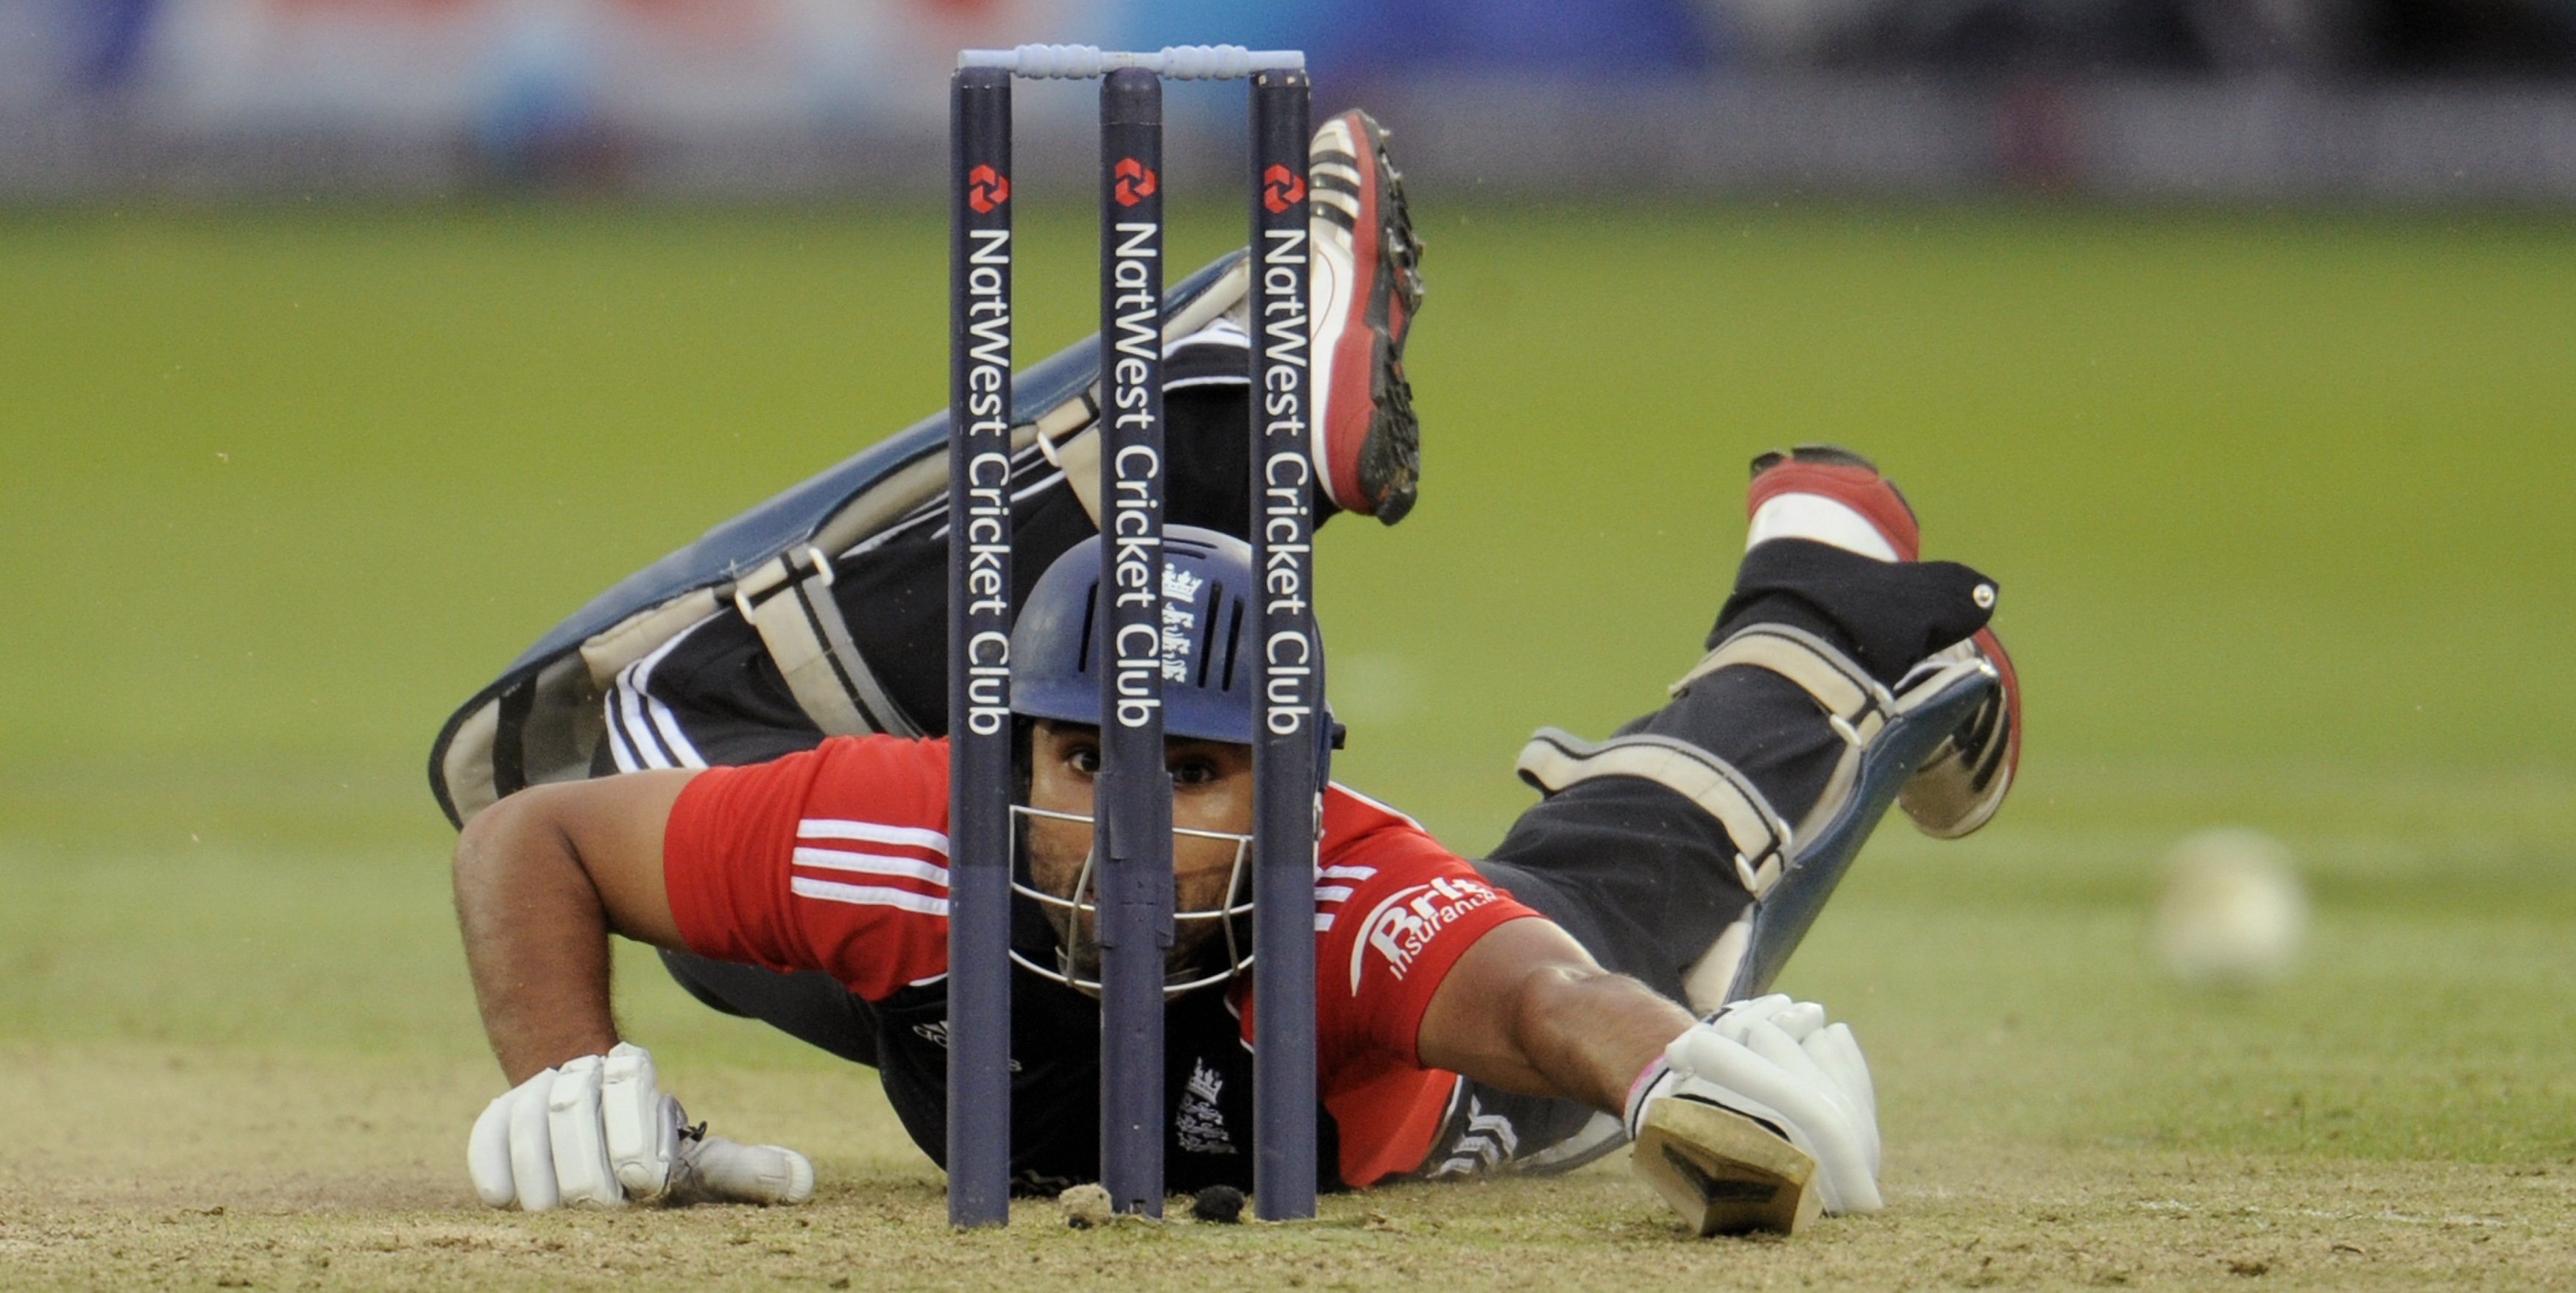 England's Ravi Bopara dives into his crease during a one-day international cricket match against India at Lord's in 2011. Photo: Reuters